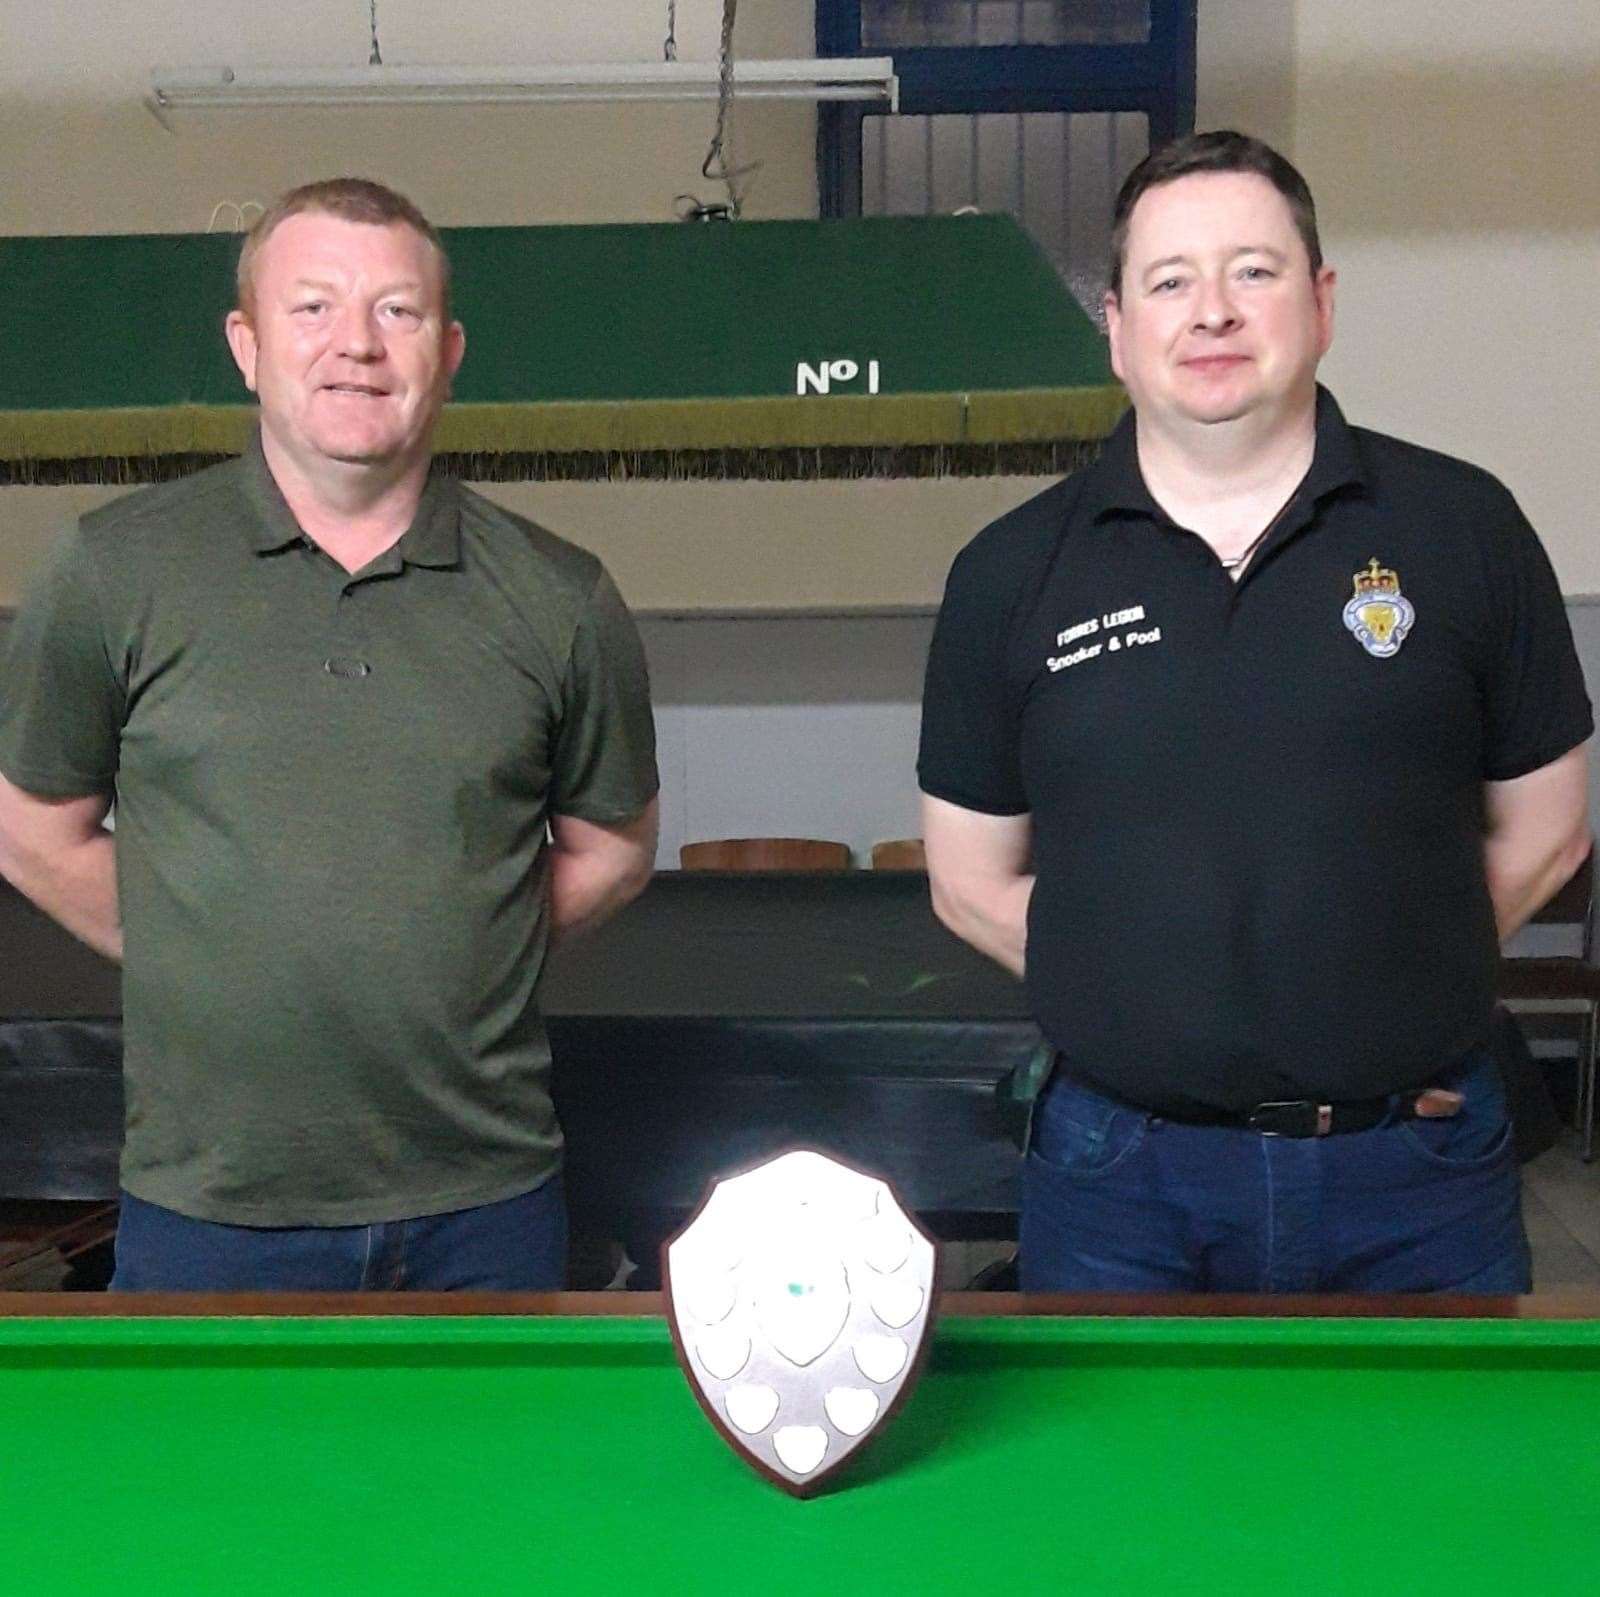 Runner-up Alex Cooper left and Stephen Hepburn, who won the final on the last black ball.